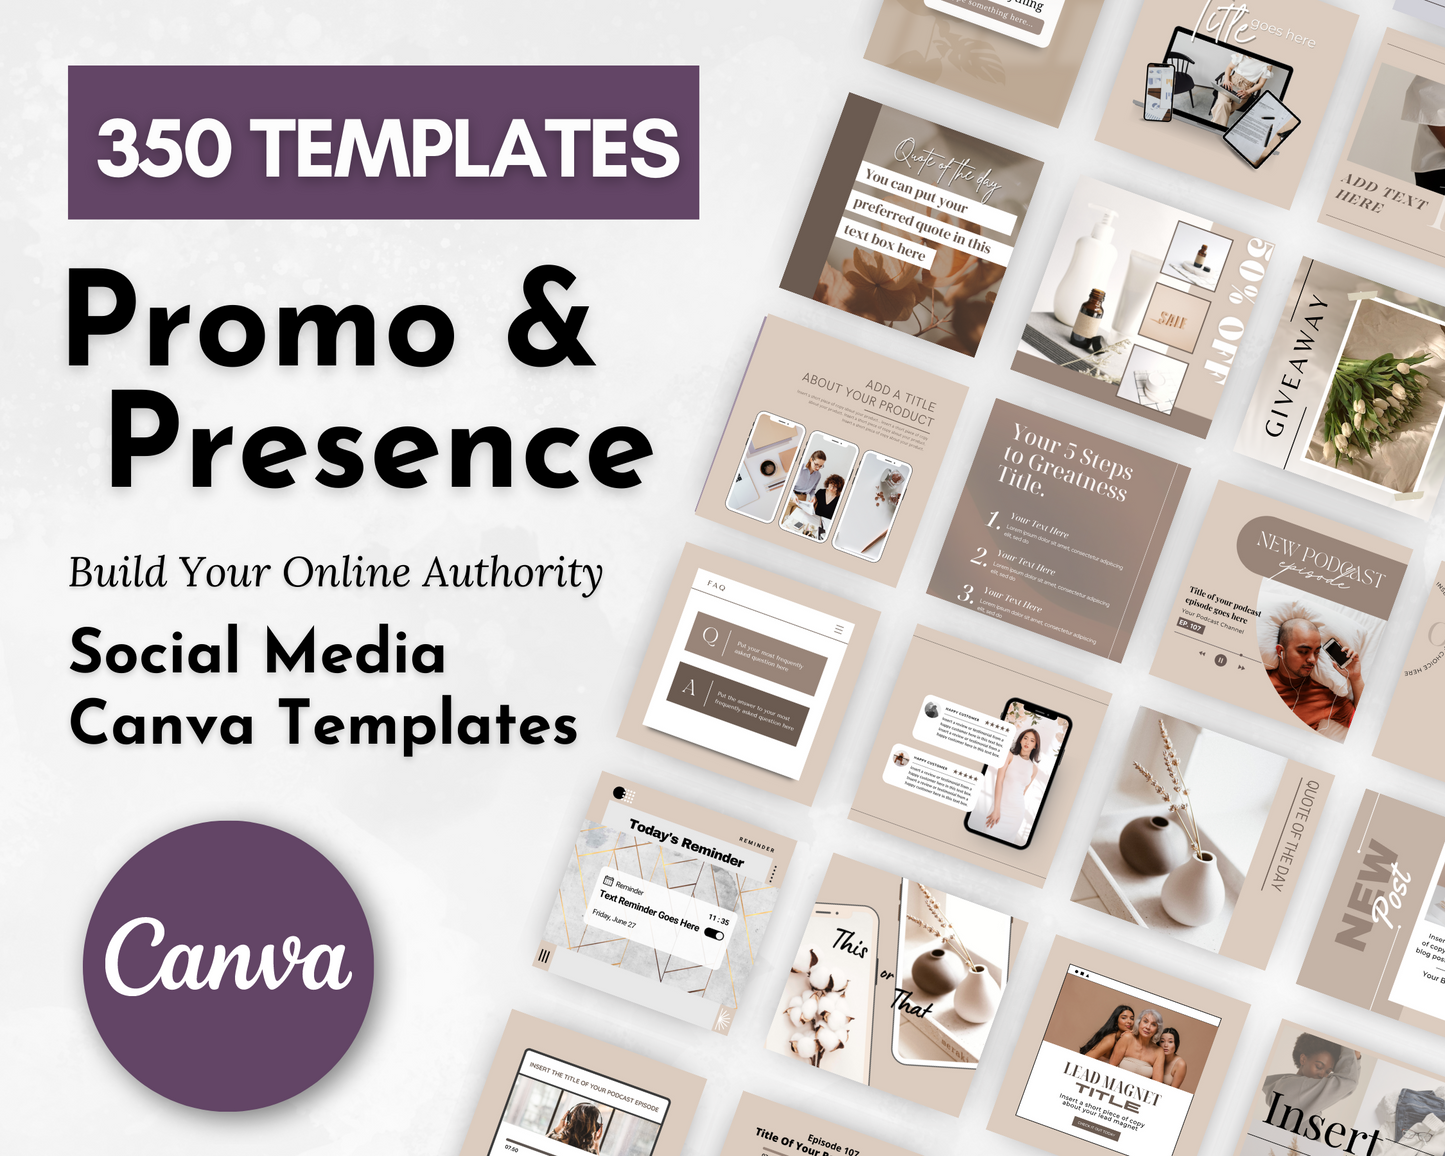 A collection of Socially Inclined social media templates focused on content creation, featuring captivating social media images from the Promo & Presence Social Media Post Bundle with Canva Templates to enhance your promo and presence.